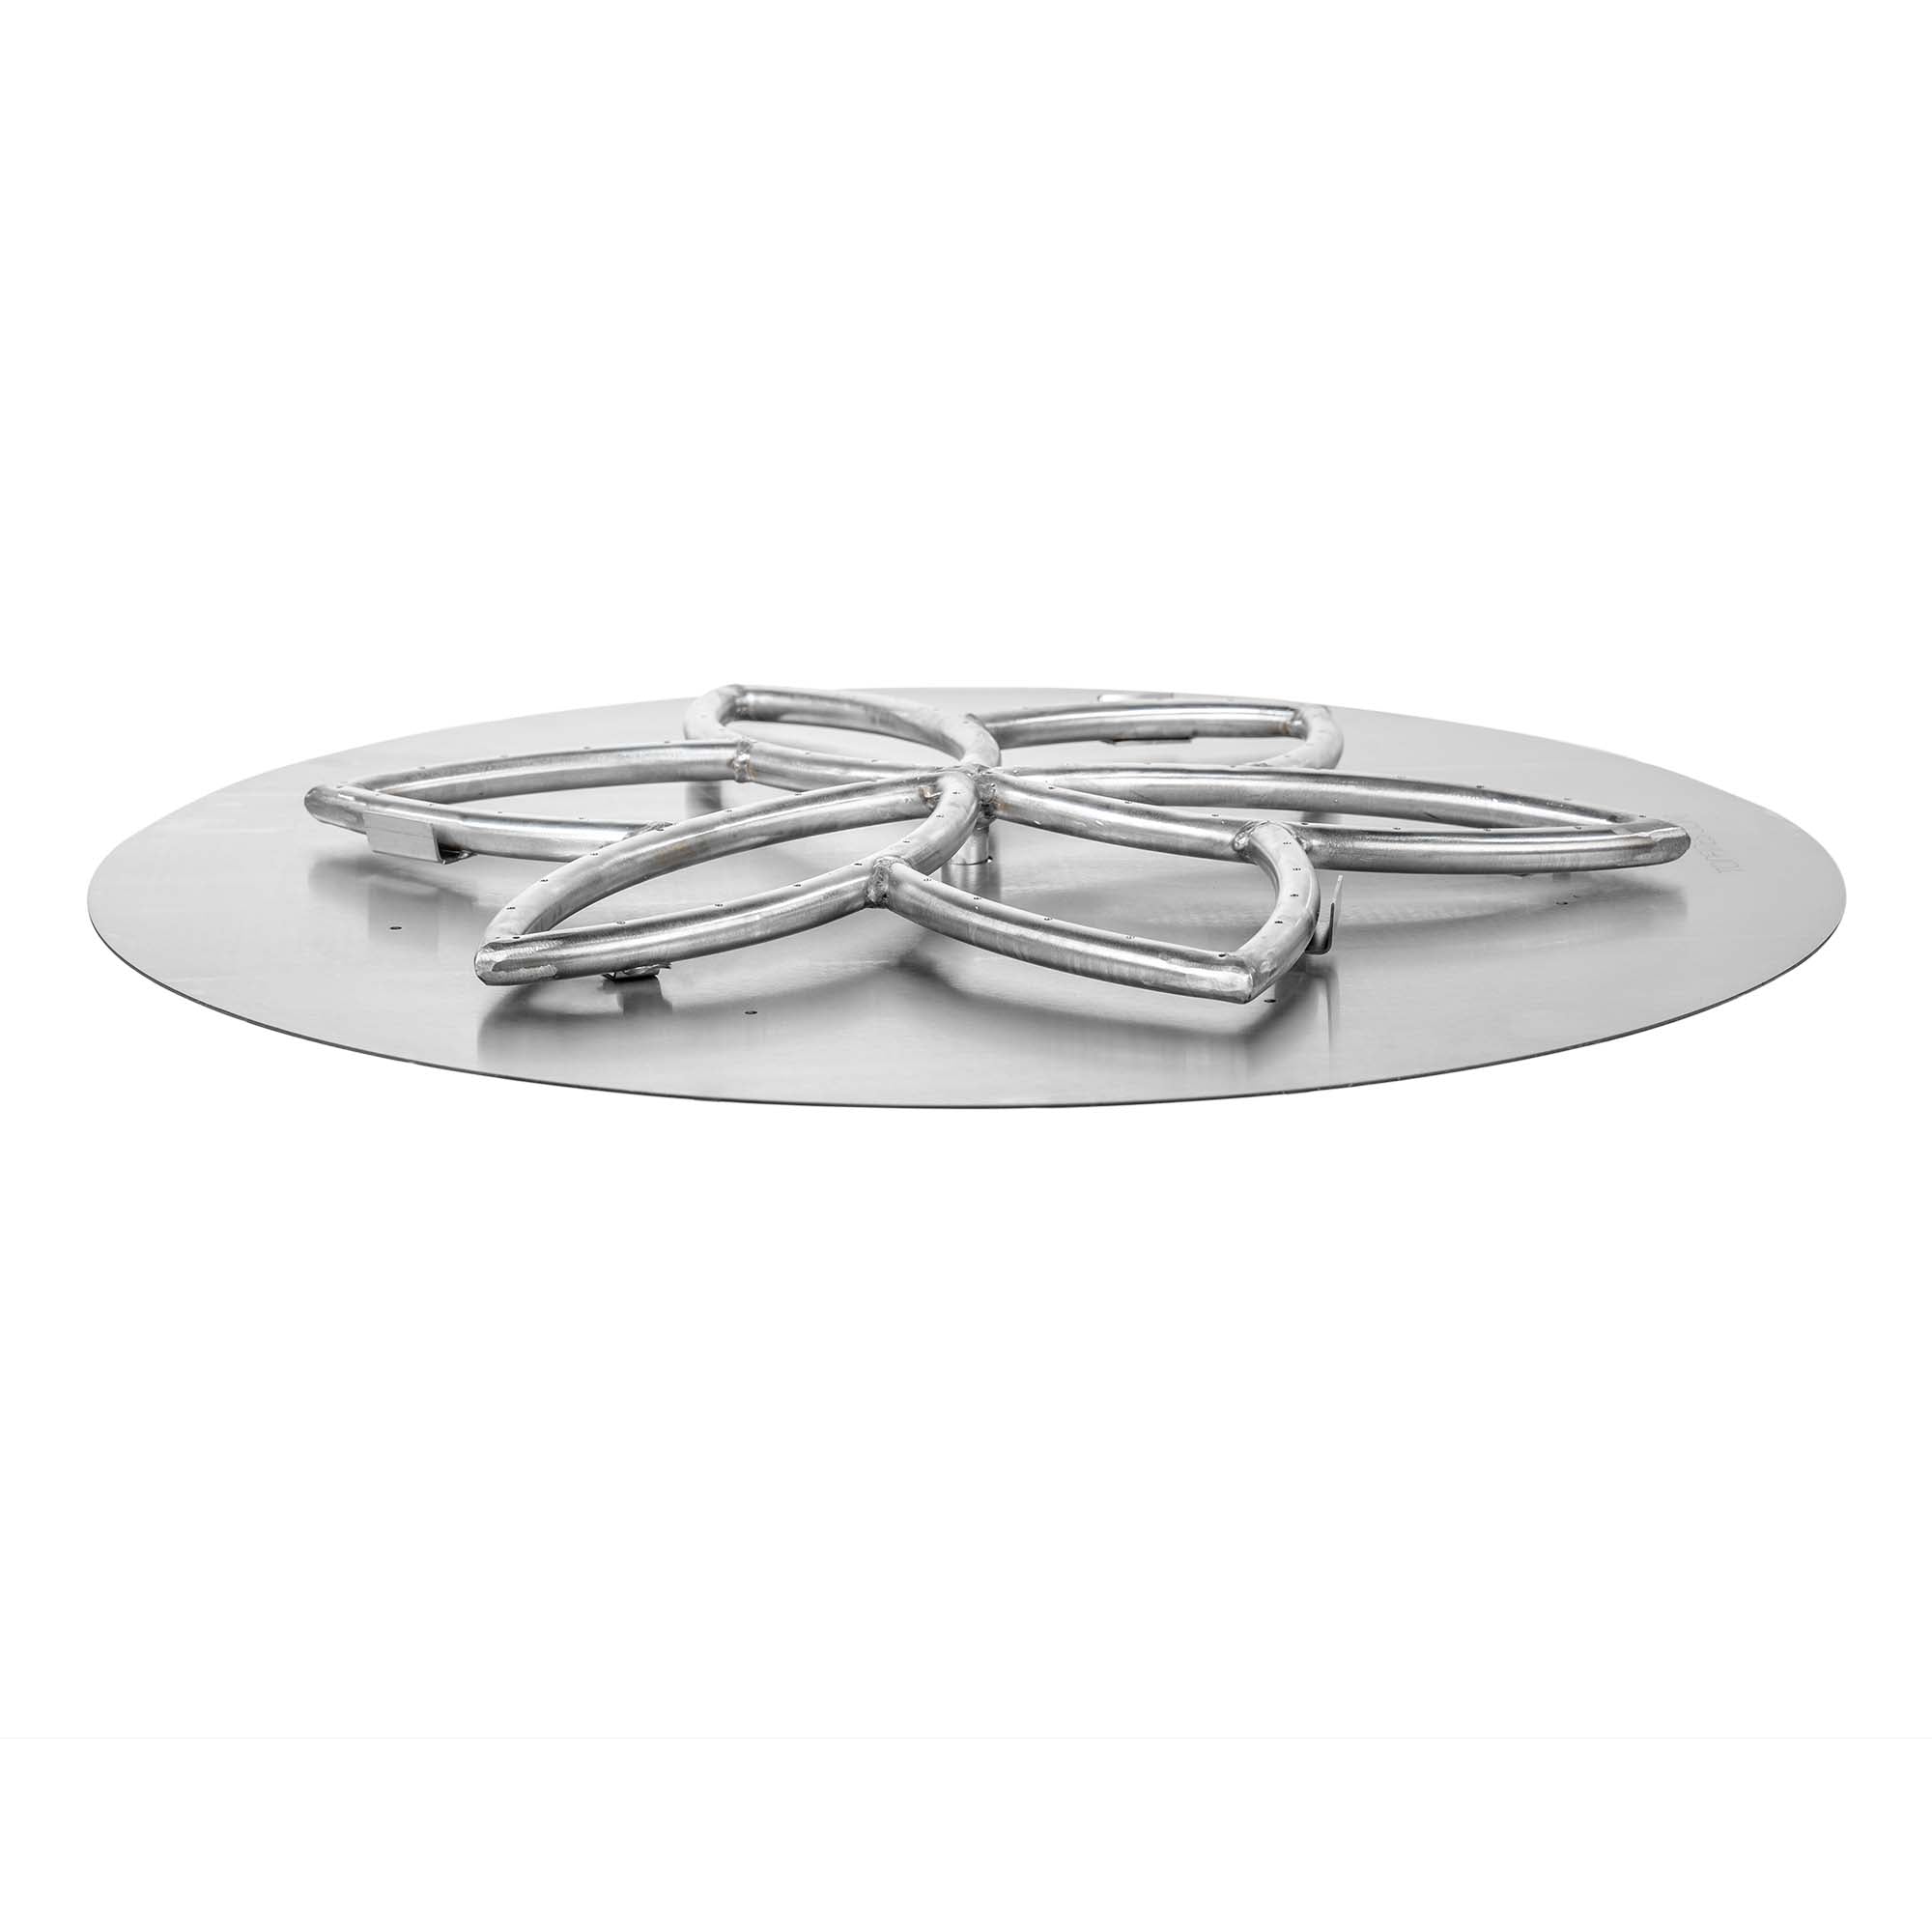 The Outdoor Plus Round Flat Pan with Stainless Steel Lotus Burner